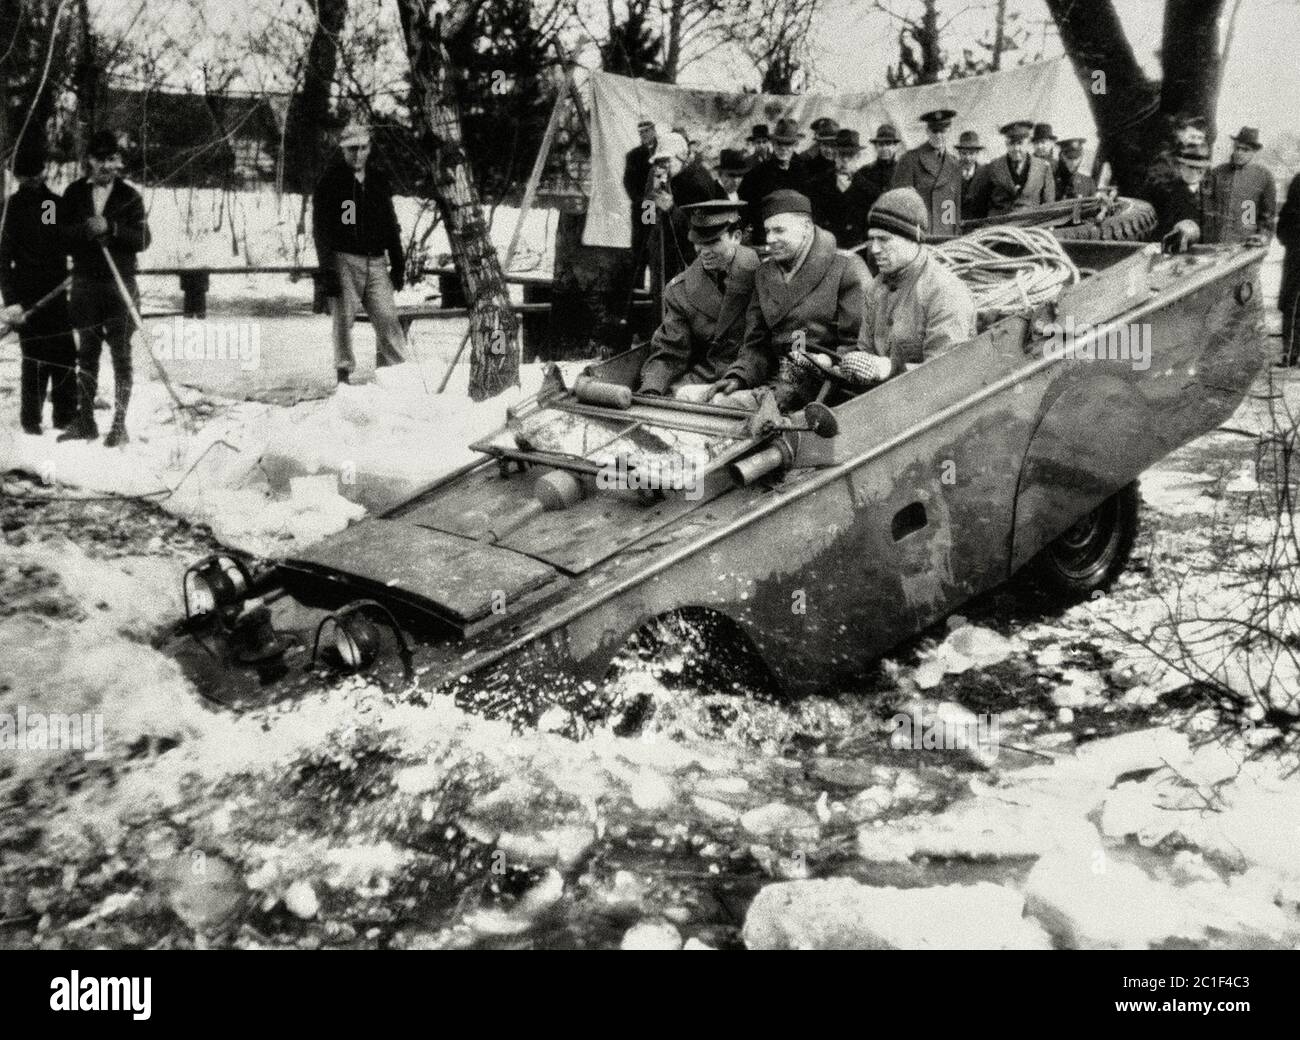 1943, March 23. One of new product - an amphibious jeep produced for the US army, slides into icy water for testing, in the Detroit area Stock Photo